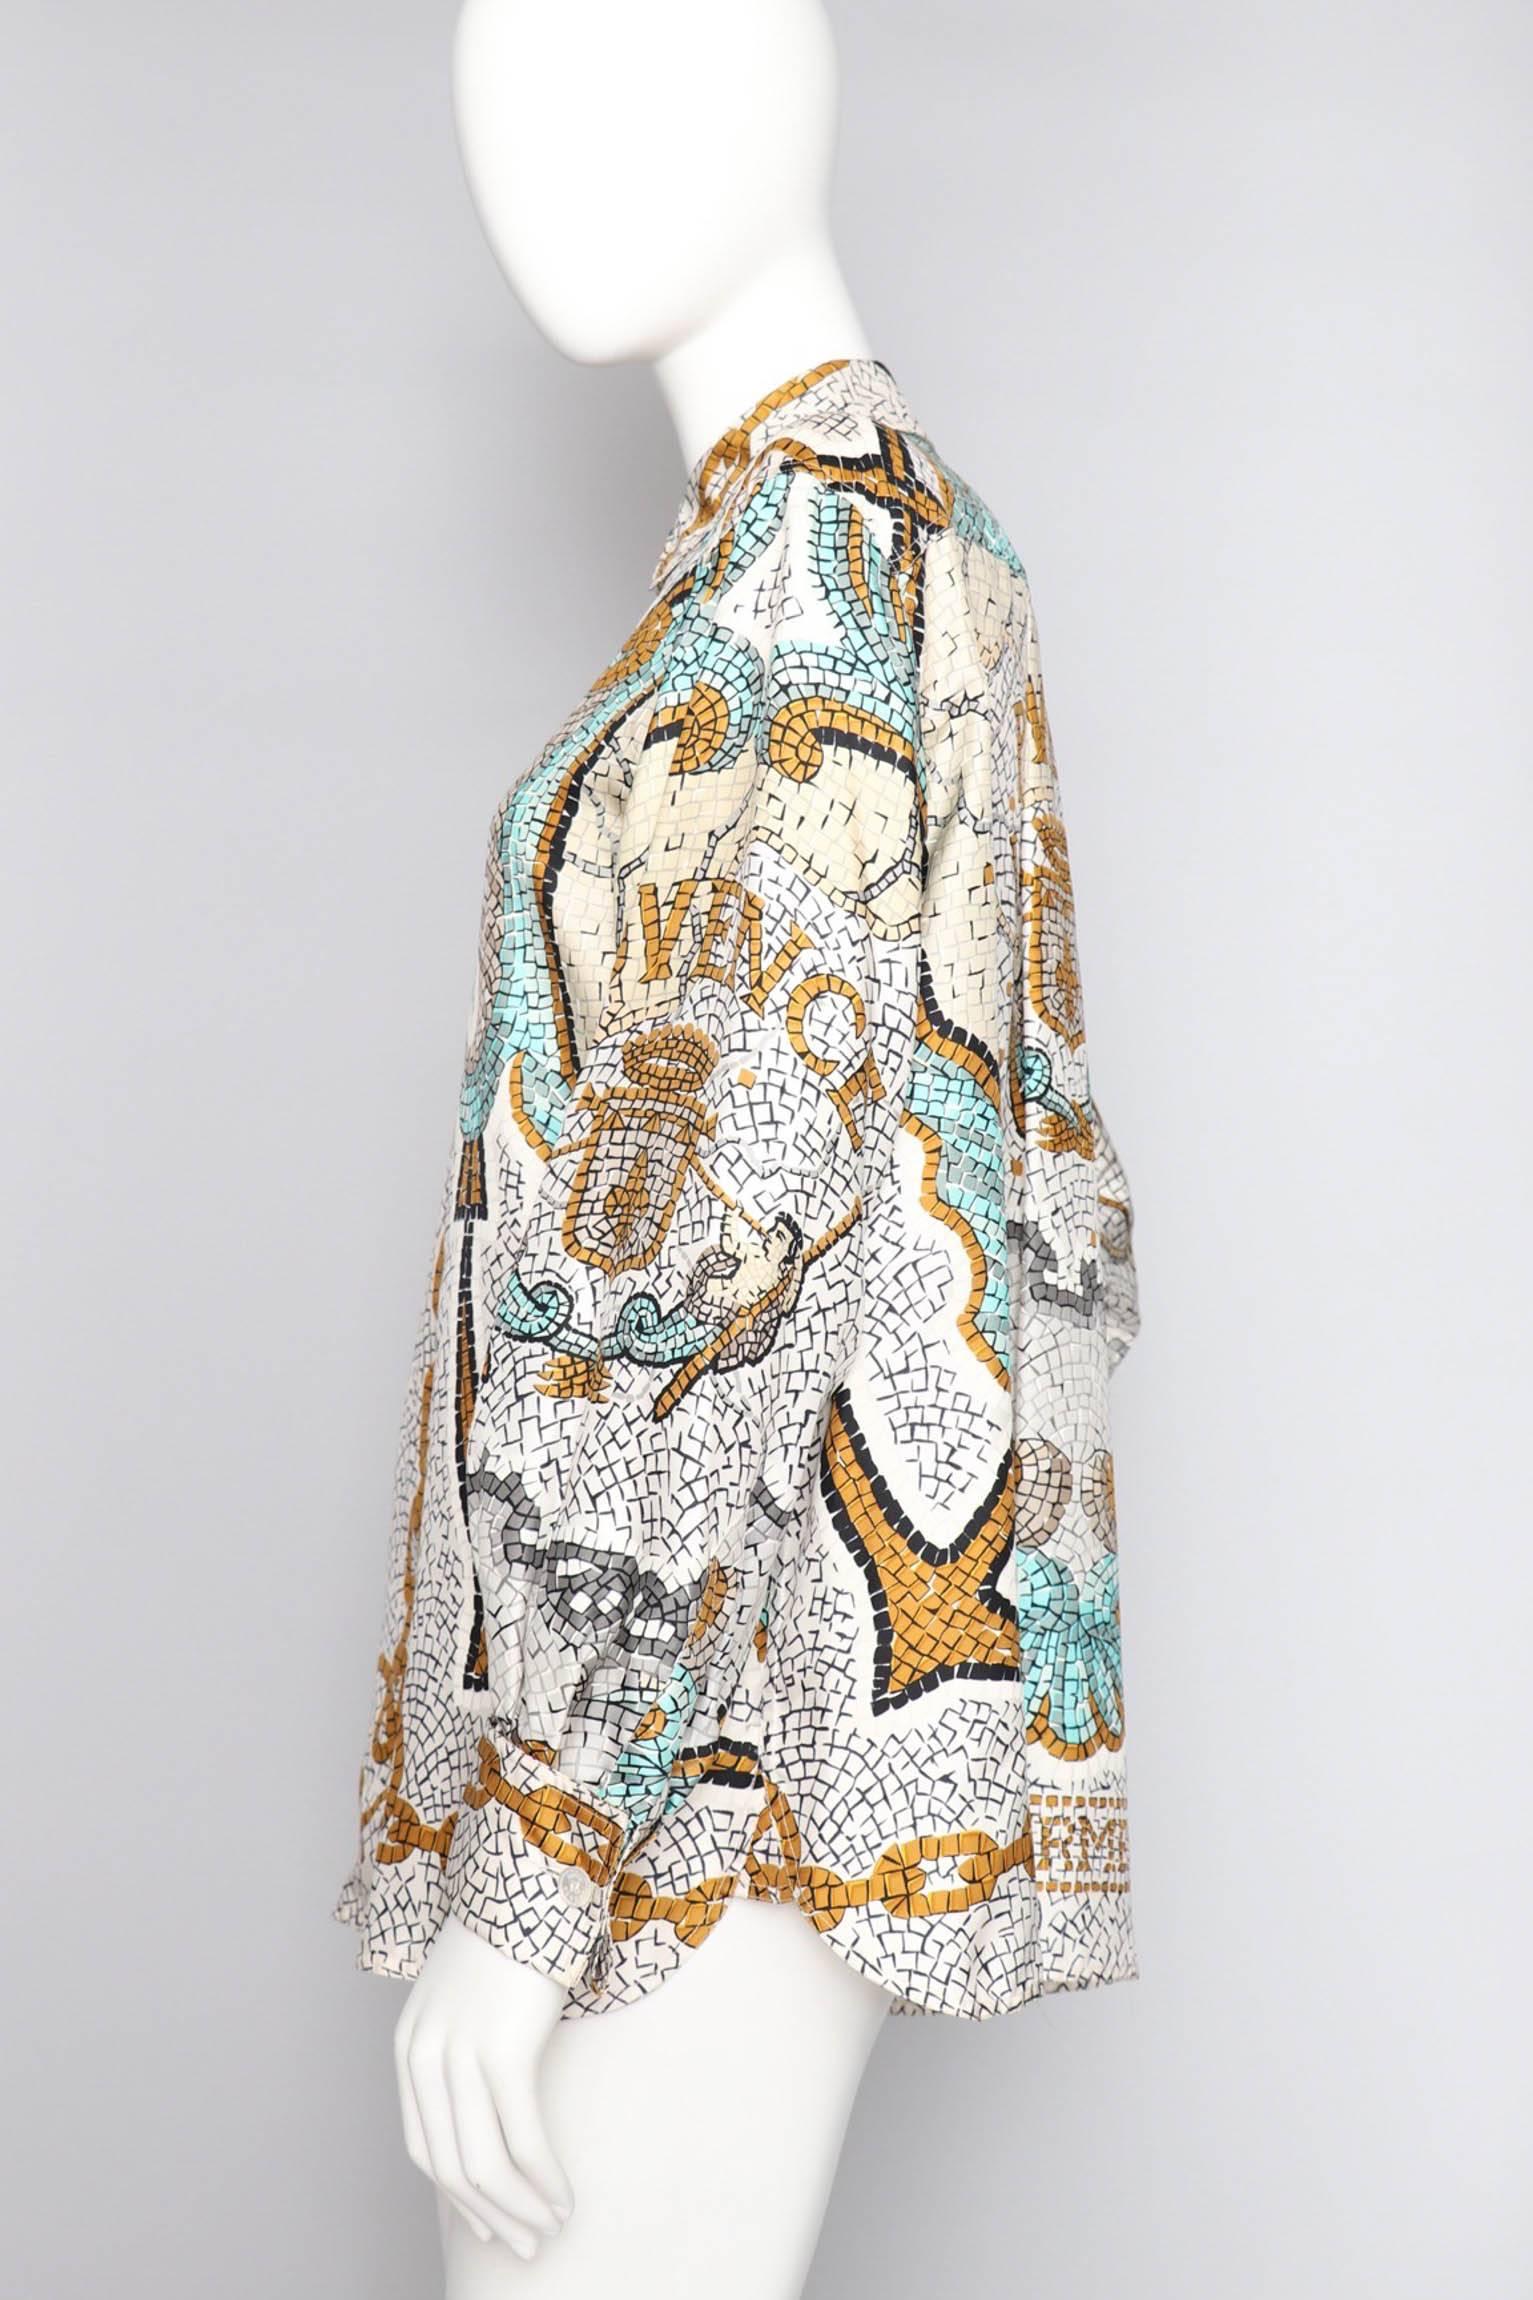 An absolutely incredible Hermés silk twill blouse issued in 1956 themed "Provence" by Hugo Grygkar. The mosaic print is held in Mediterranean colors of turquoise and yellow with black and white accents. Both Provence and Hermes can be